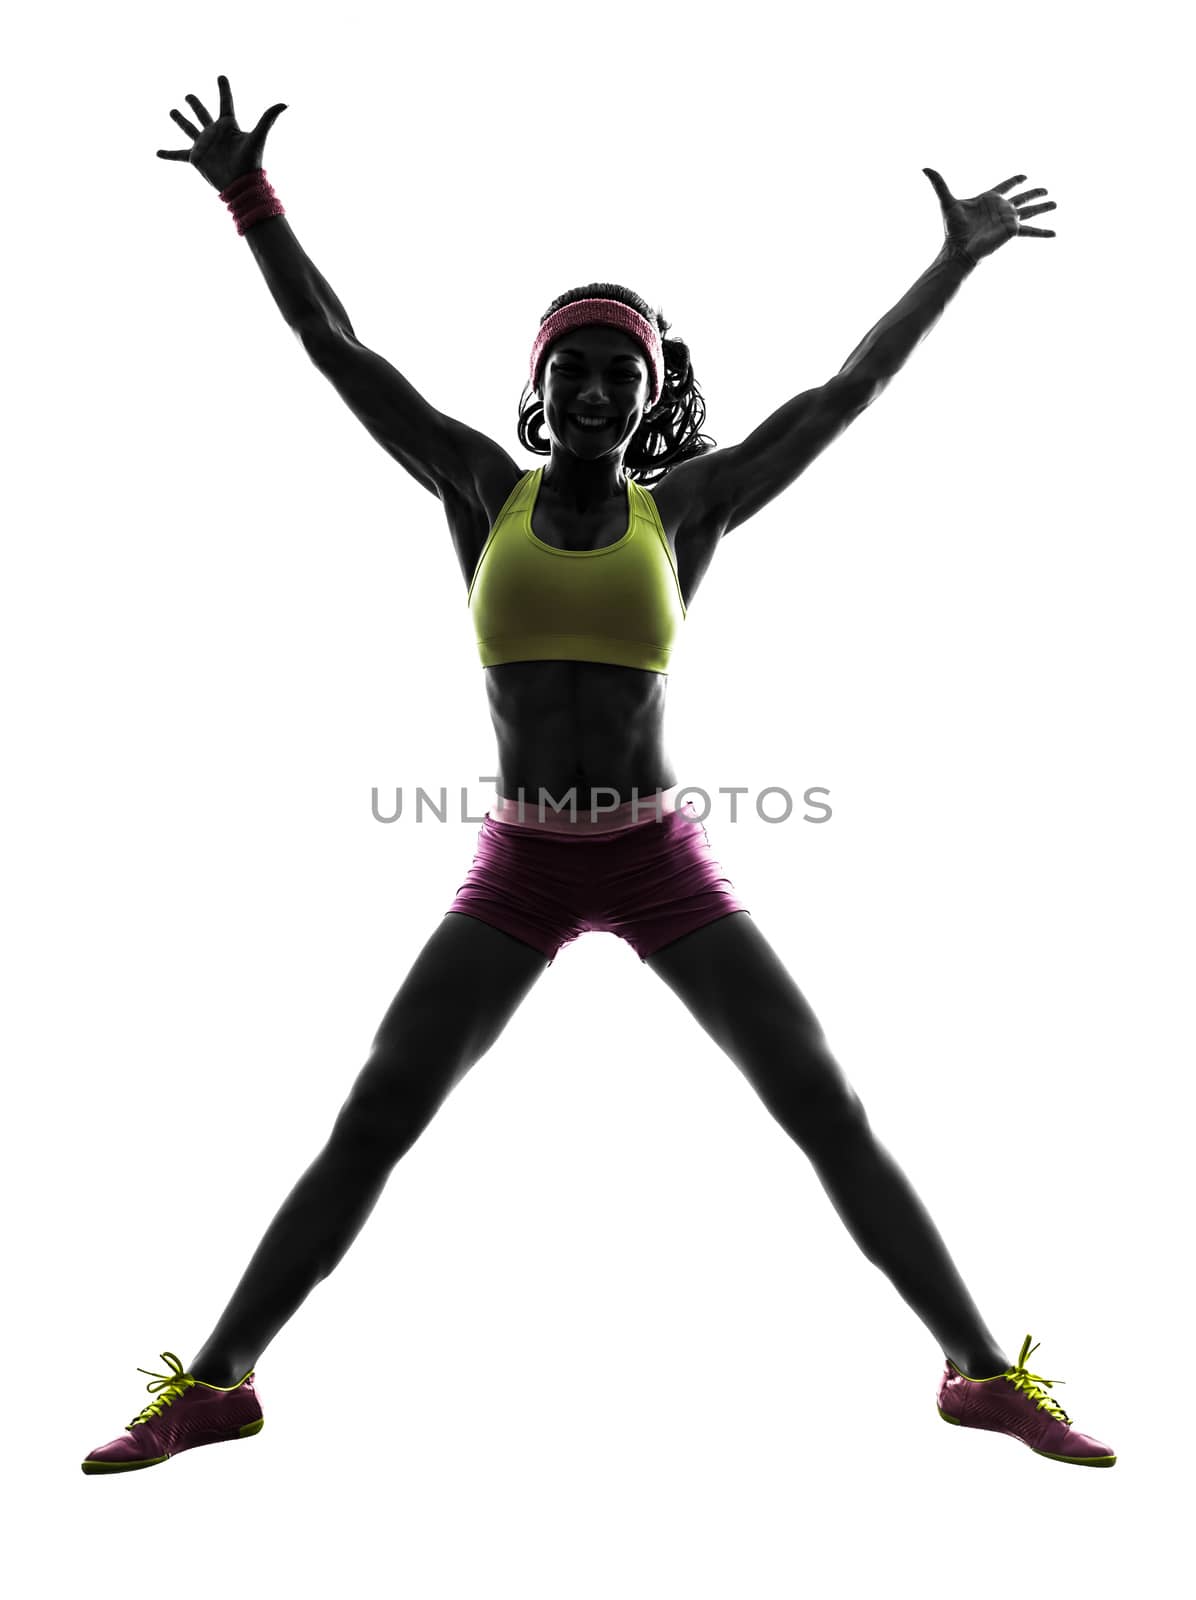 one caucasian woman jumping arms raised  in silhouette on white background